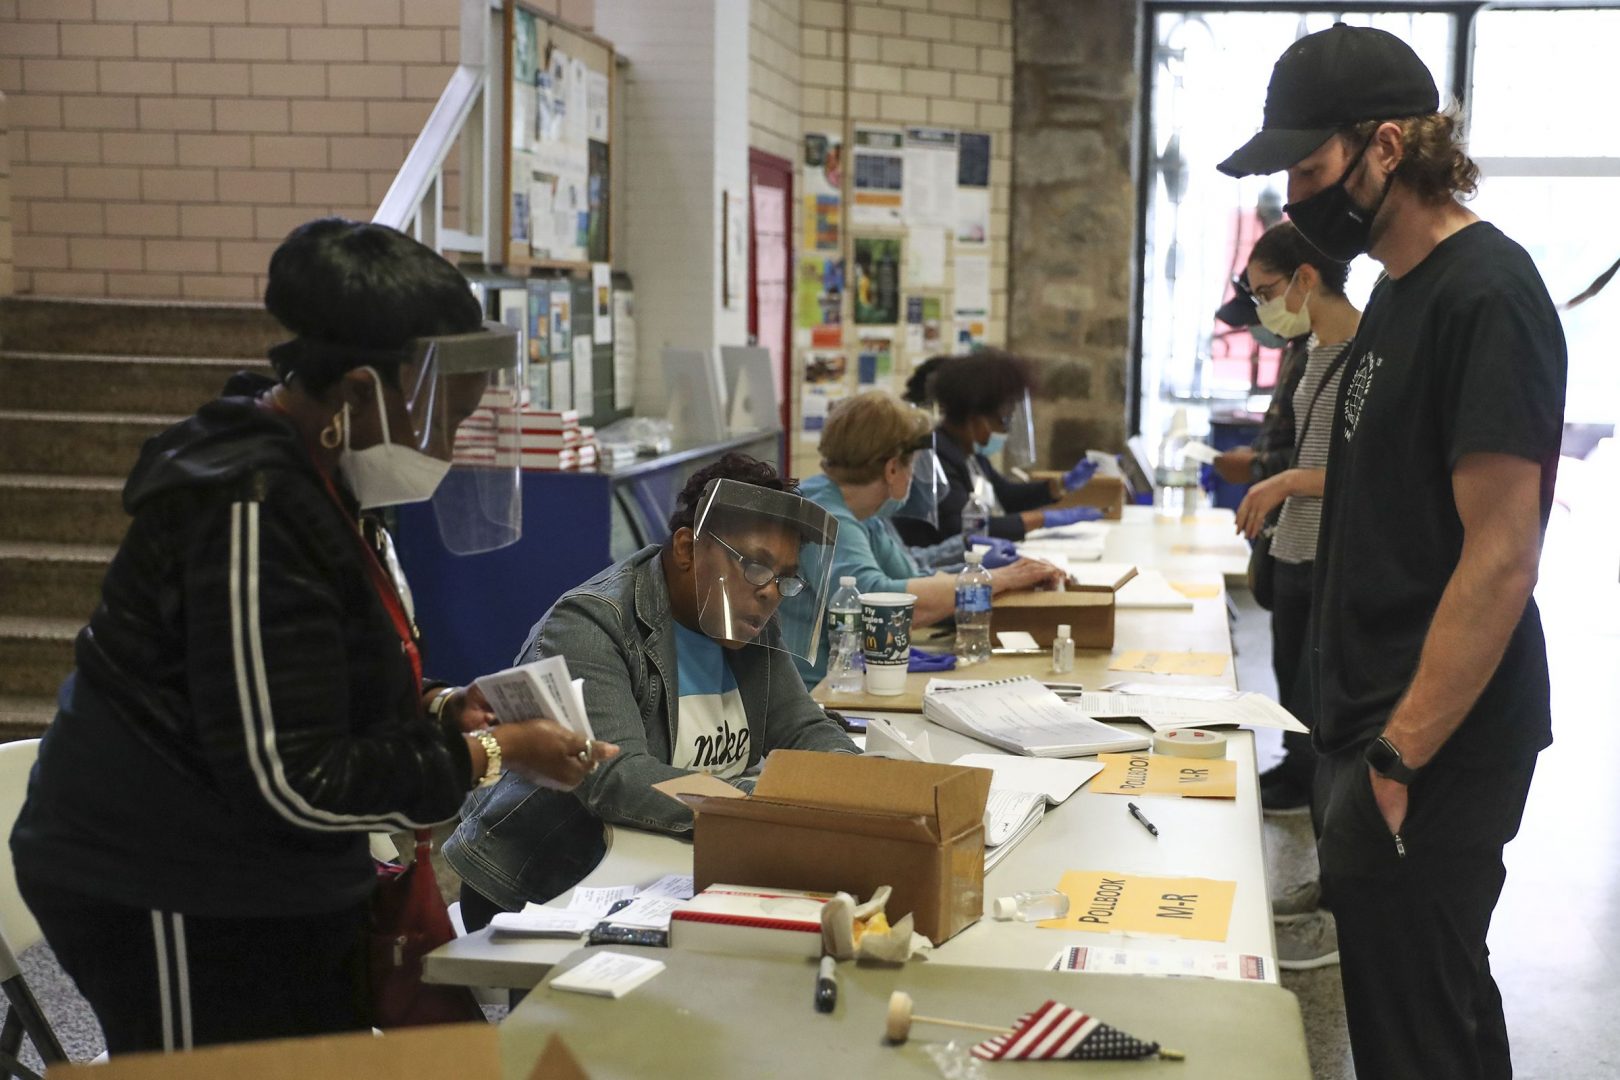 This year, recruitment efforts from the state government and initiatives like Power to the Polls and the Voter Project have helped bring in an army of new volunteers to work at Pennsylvania’s more than 9,000 polling places.